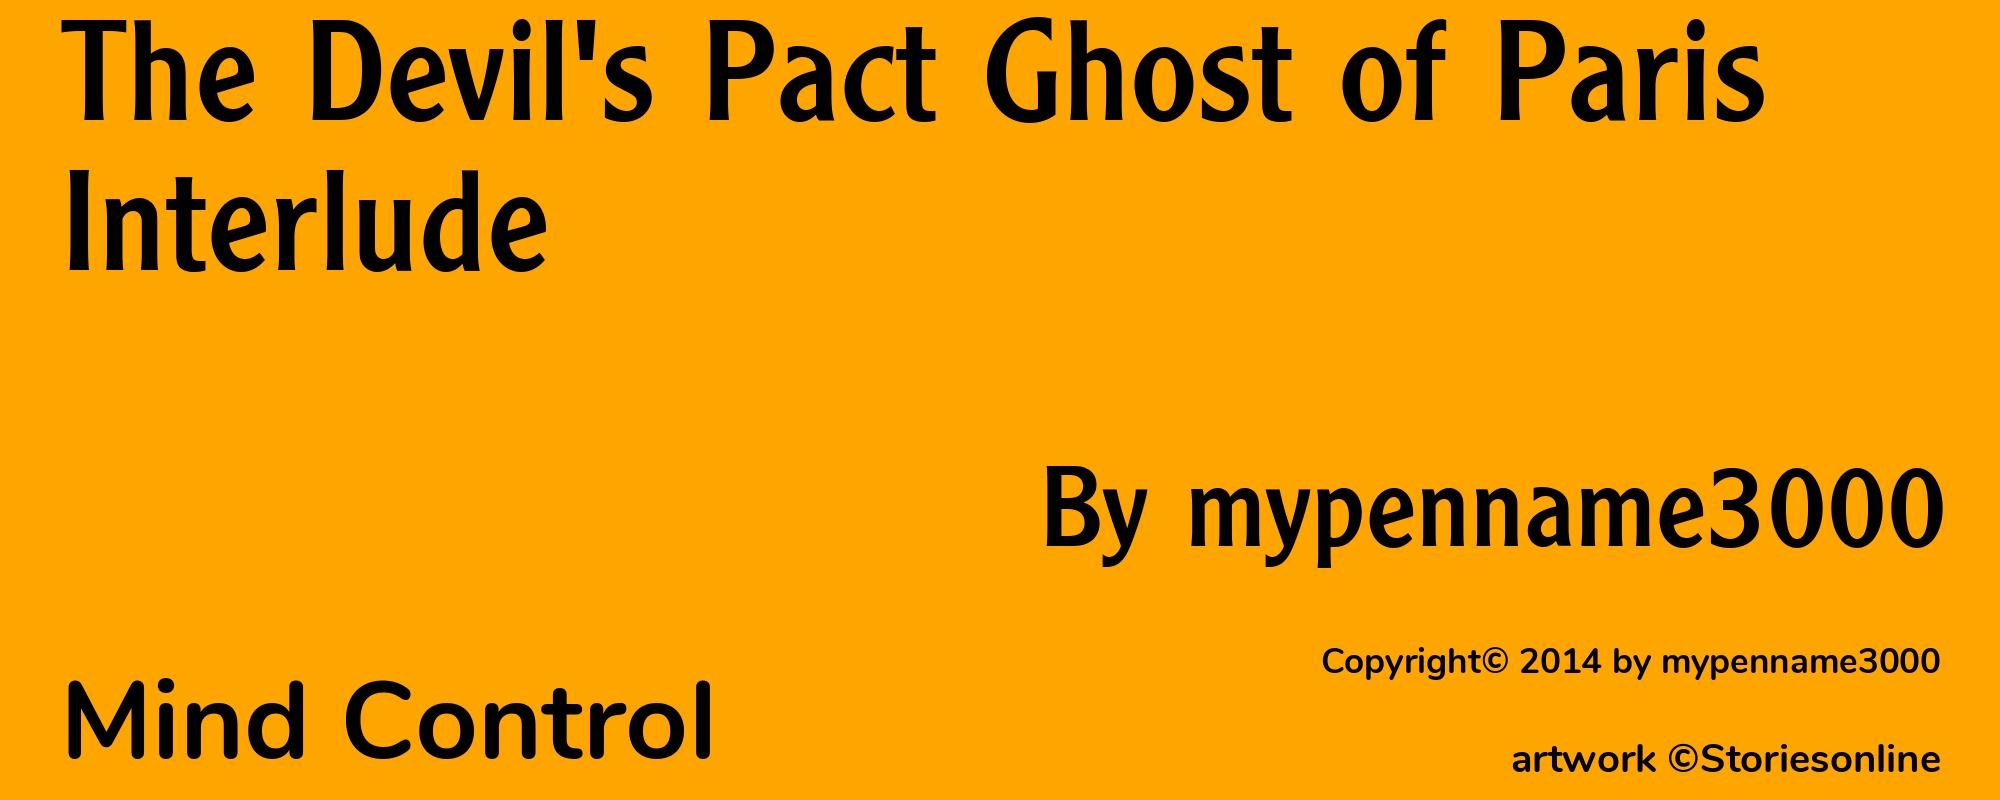 The Devil's Pact Ghost of Paris Interlude - Cover